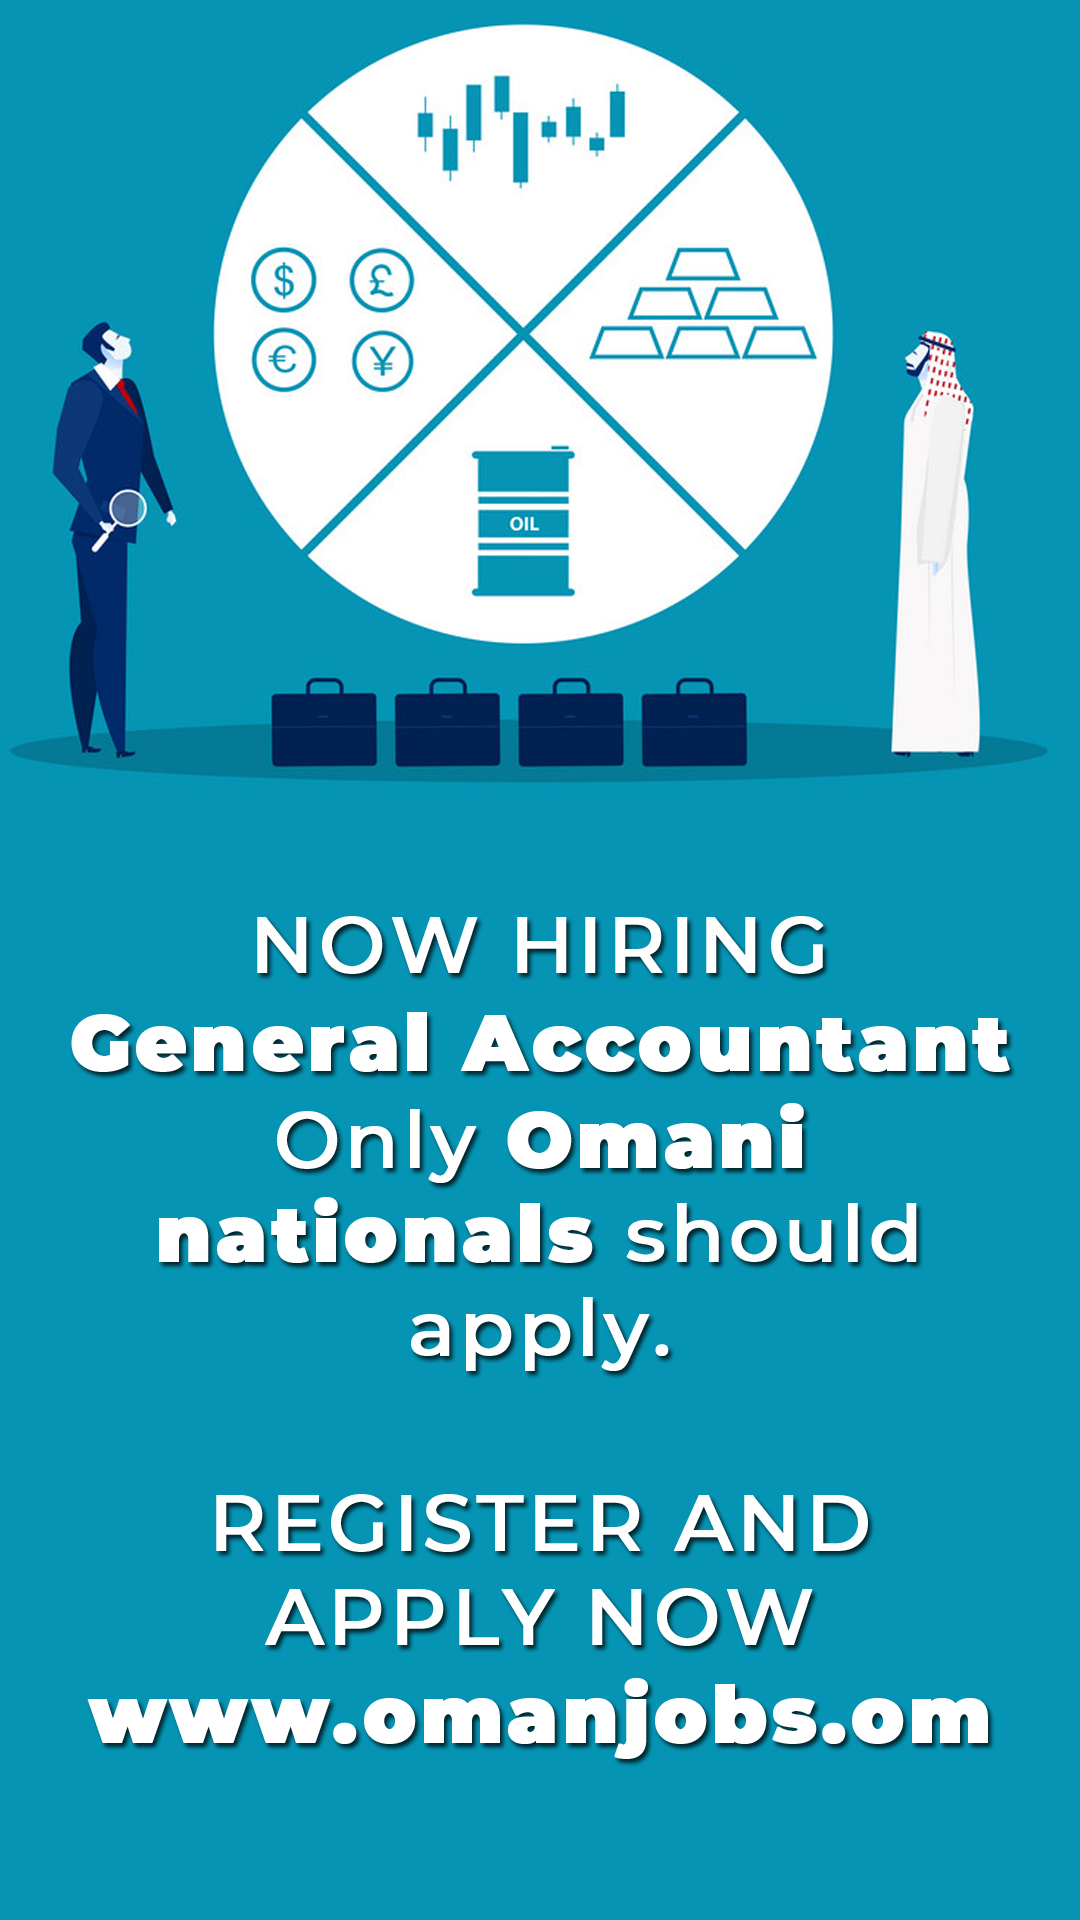 NOW HIRING General Accountant